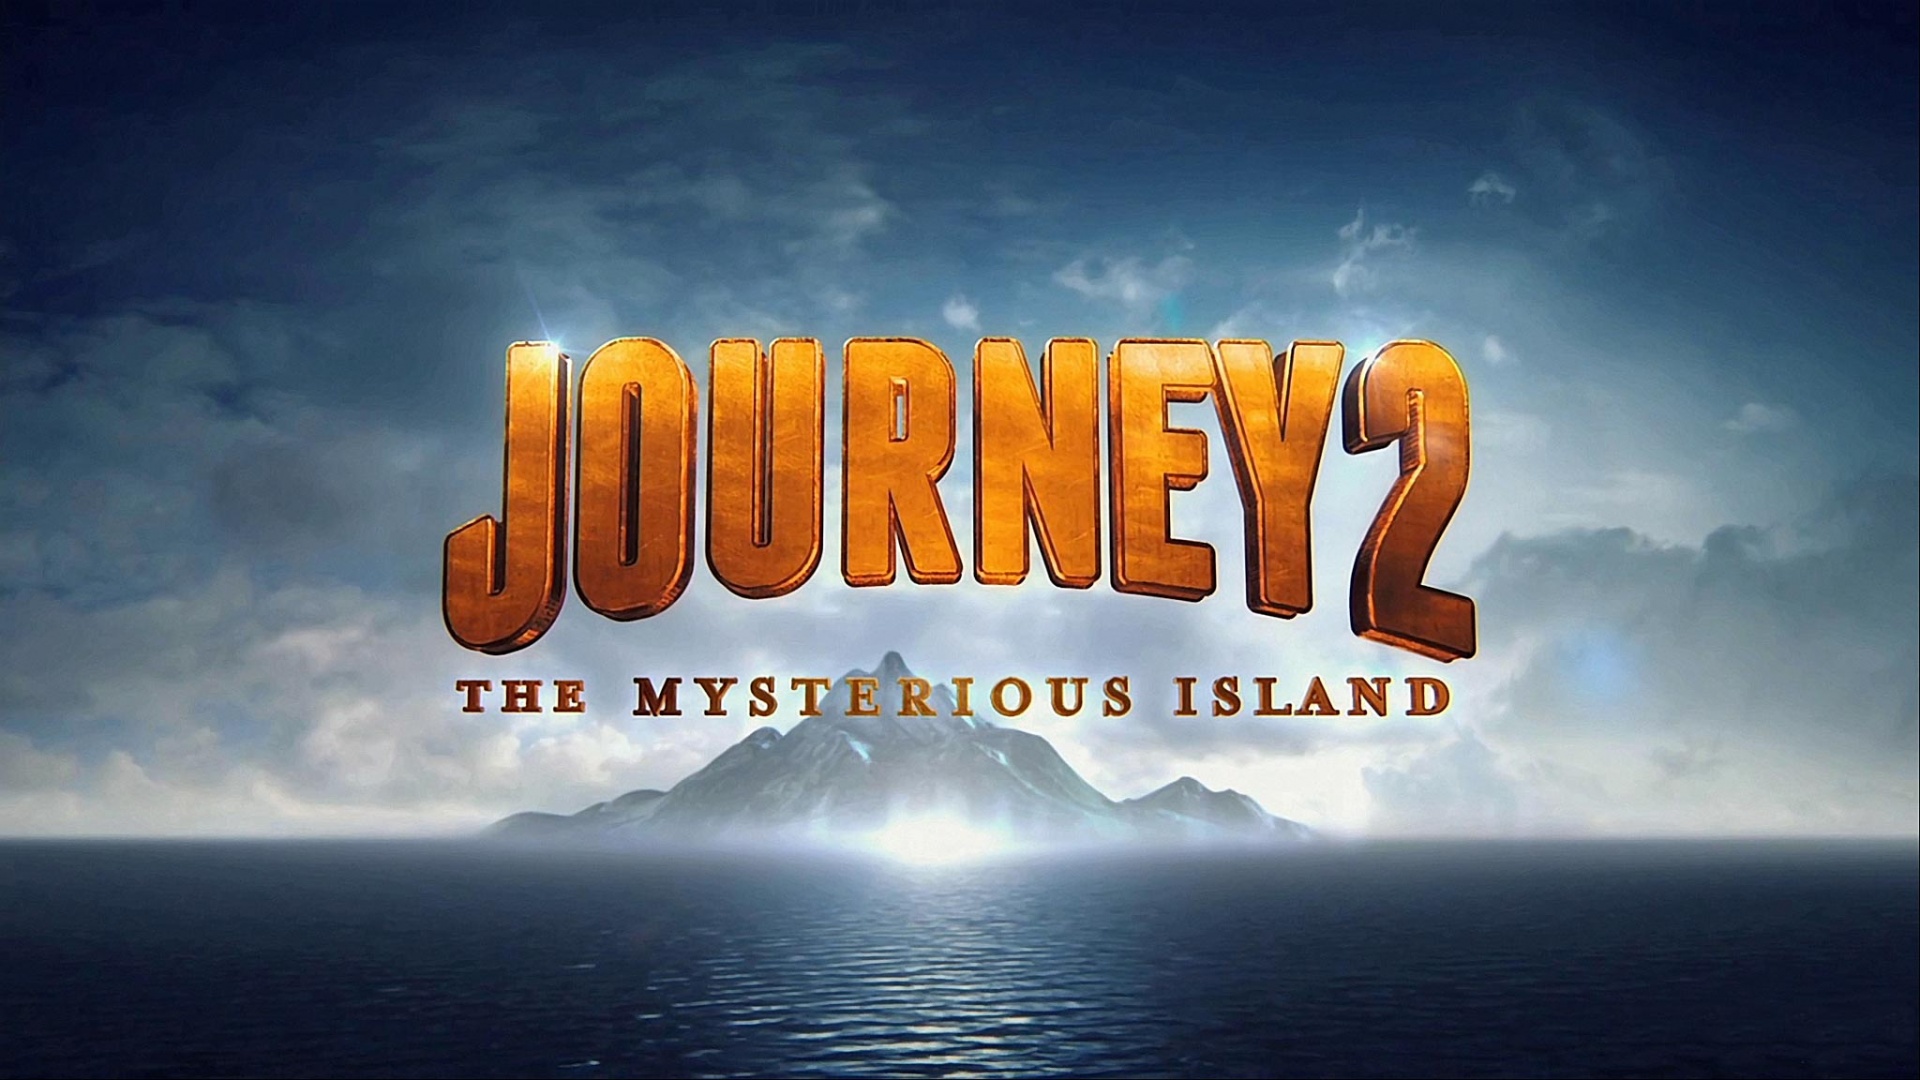 journey a mysterious island